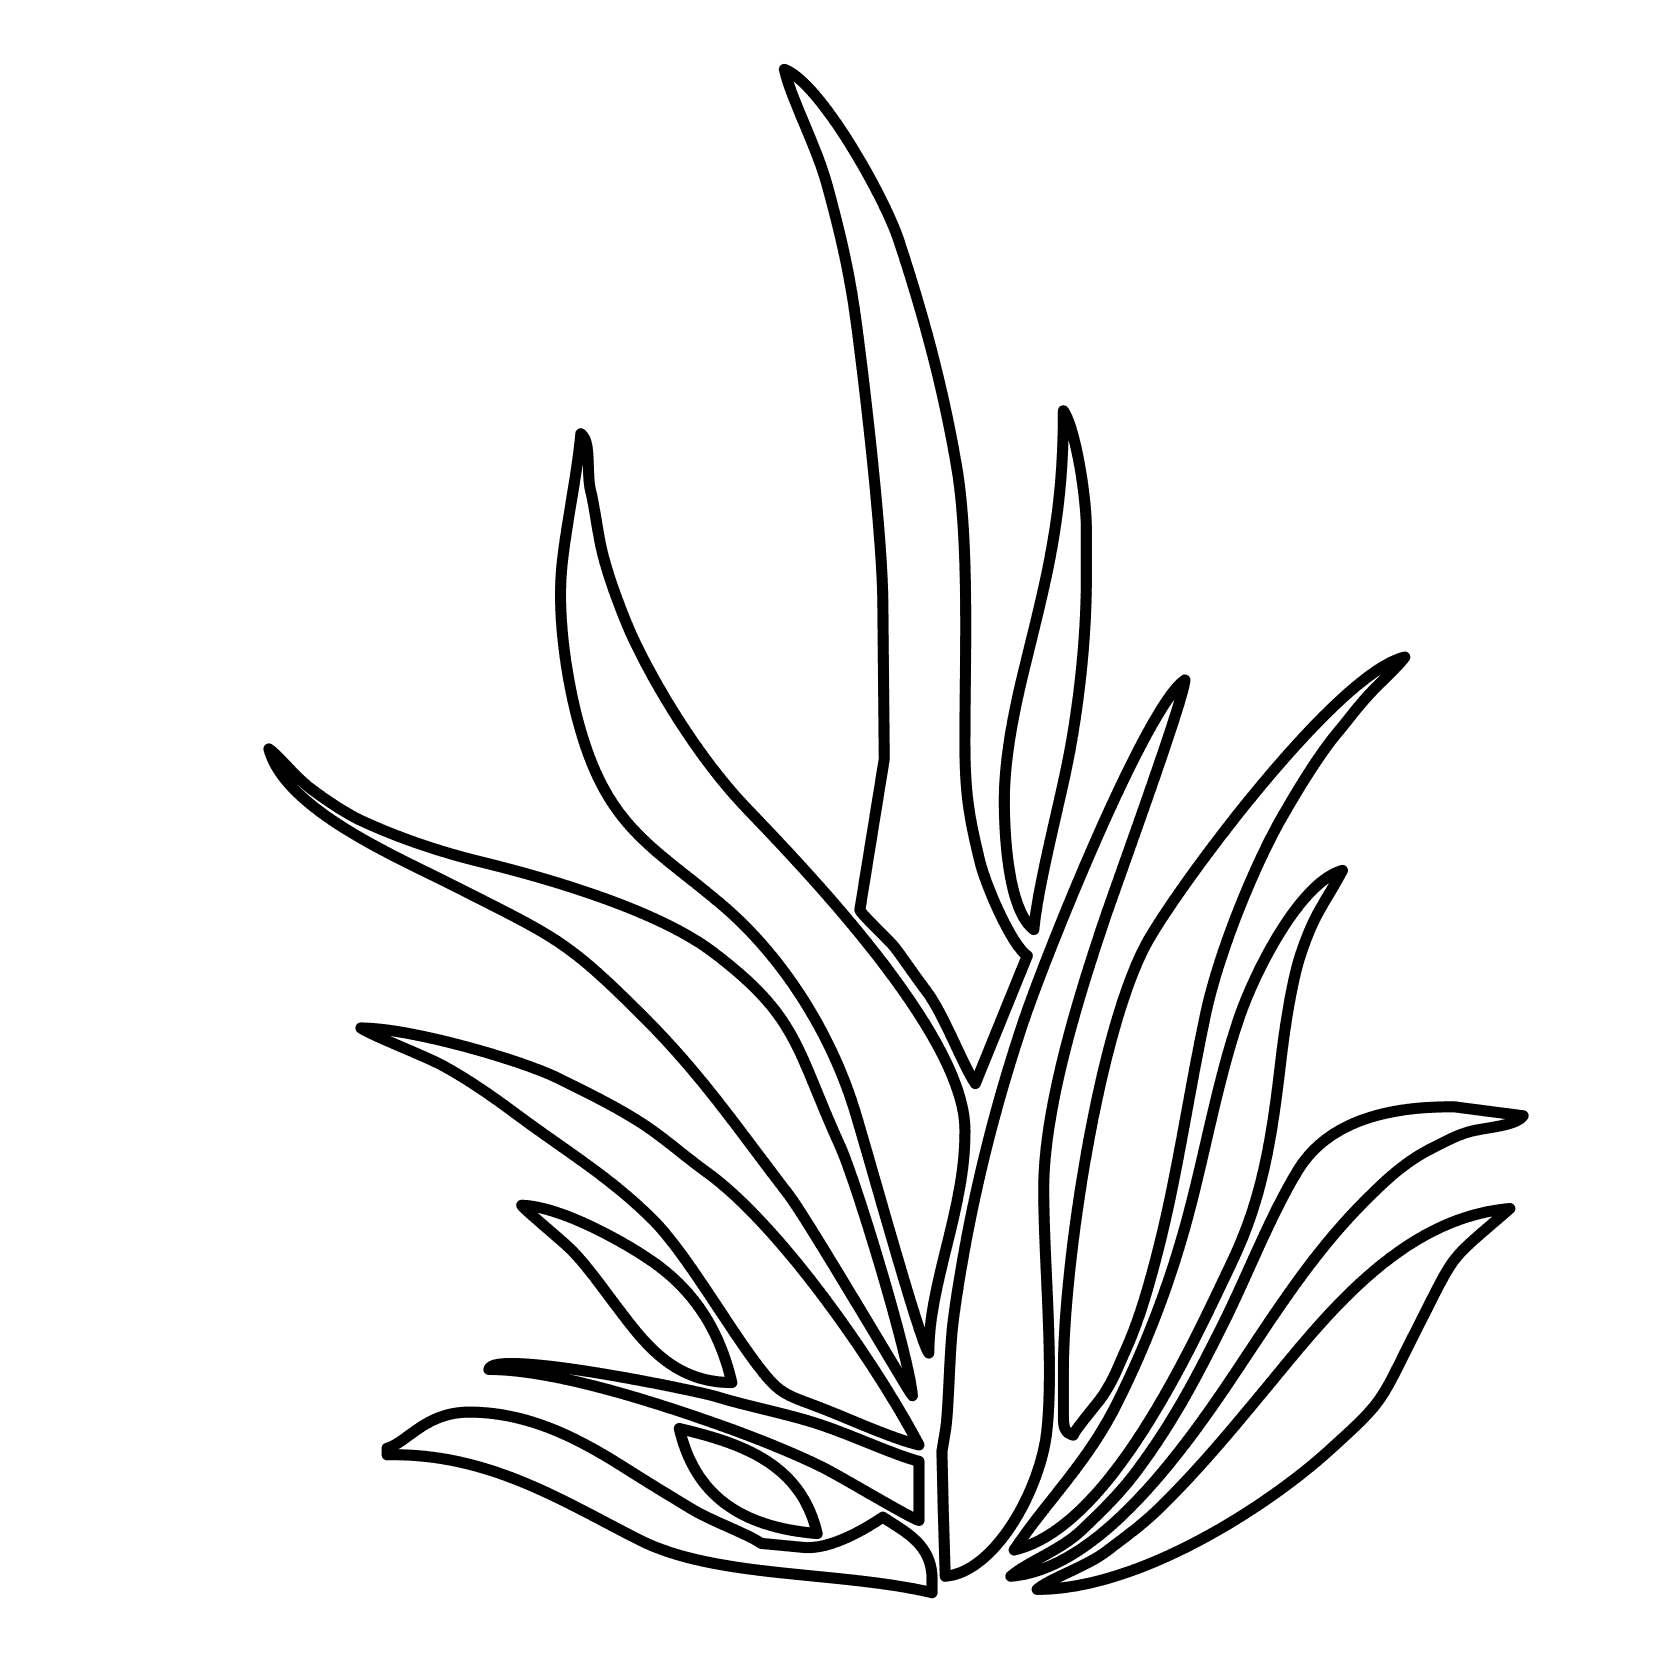 Coloring pages plants - free downloads